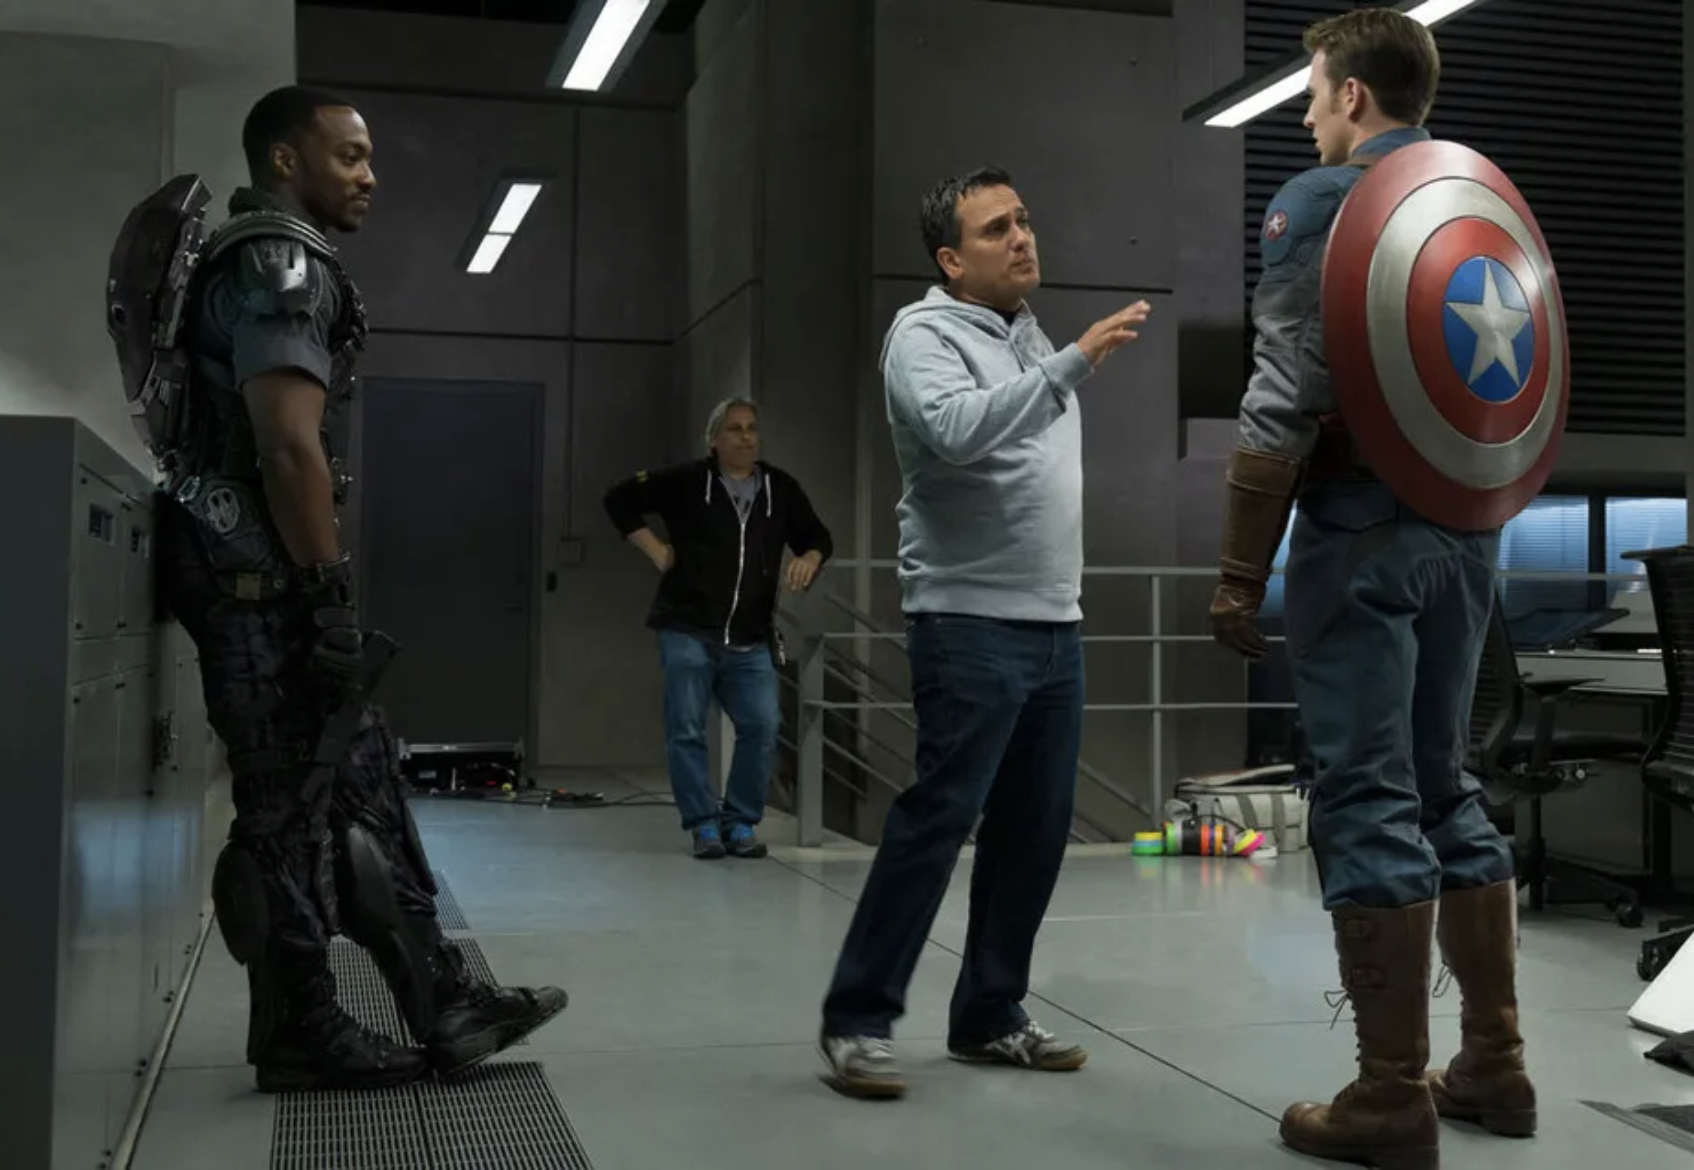 Captain America and the Winter Soldier